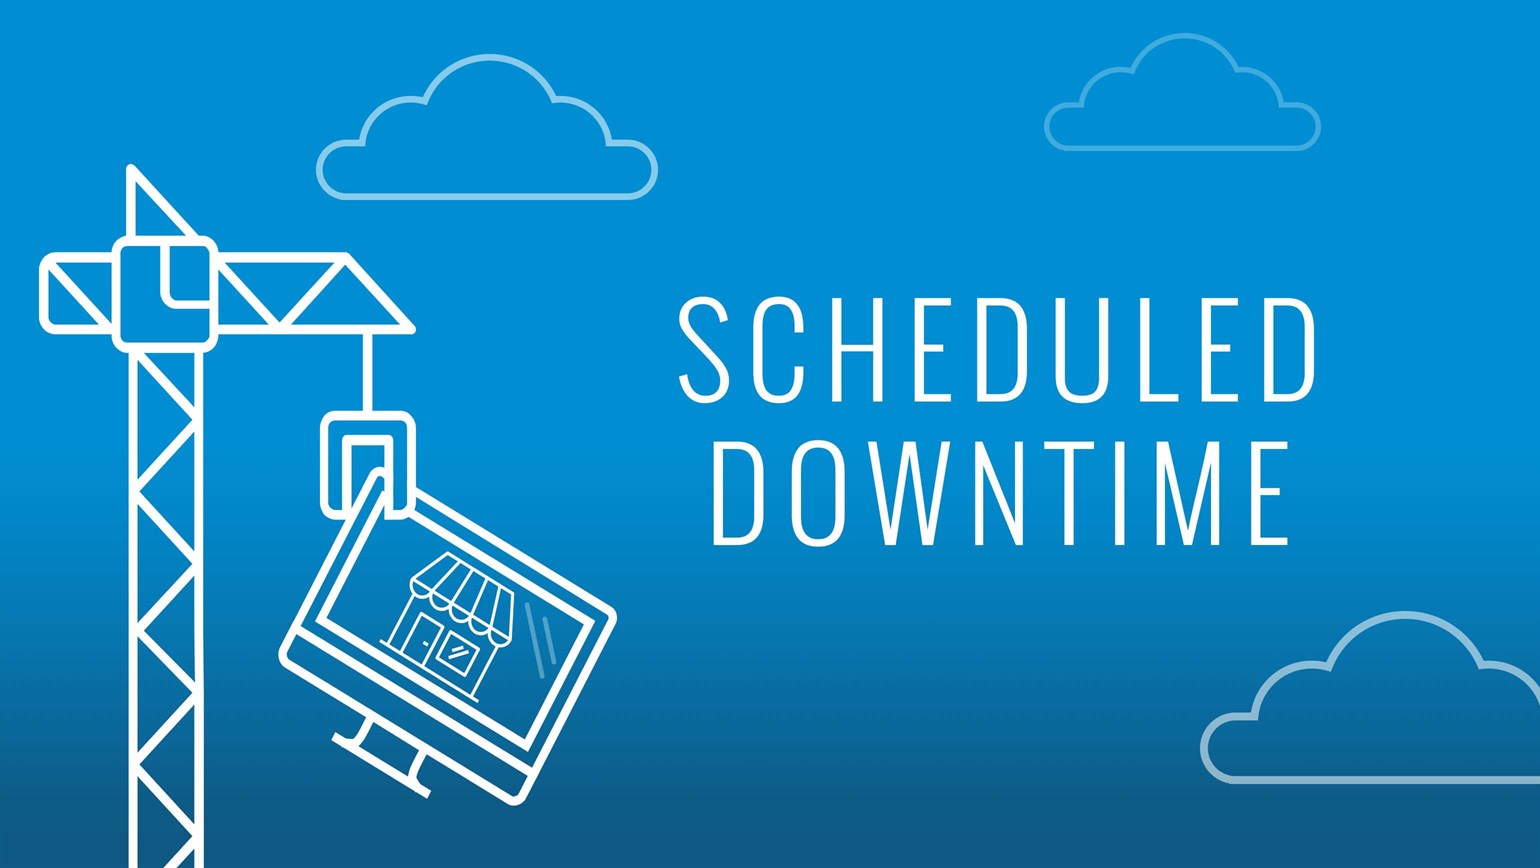 Scheduled Downtime 10/19/17